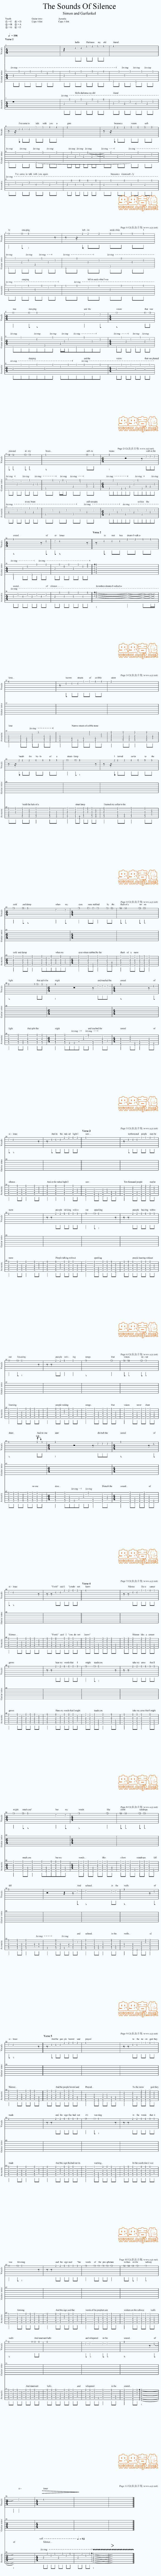 The Sounds Of Silence by Simon and Garfunkel Guitar Sheet Music Free